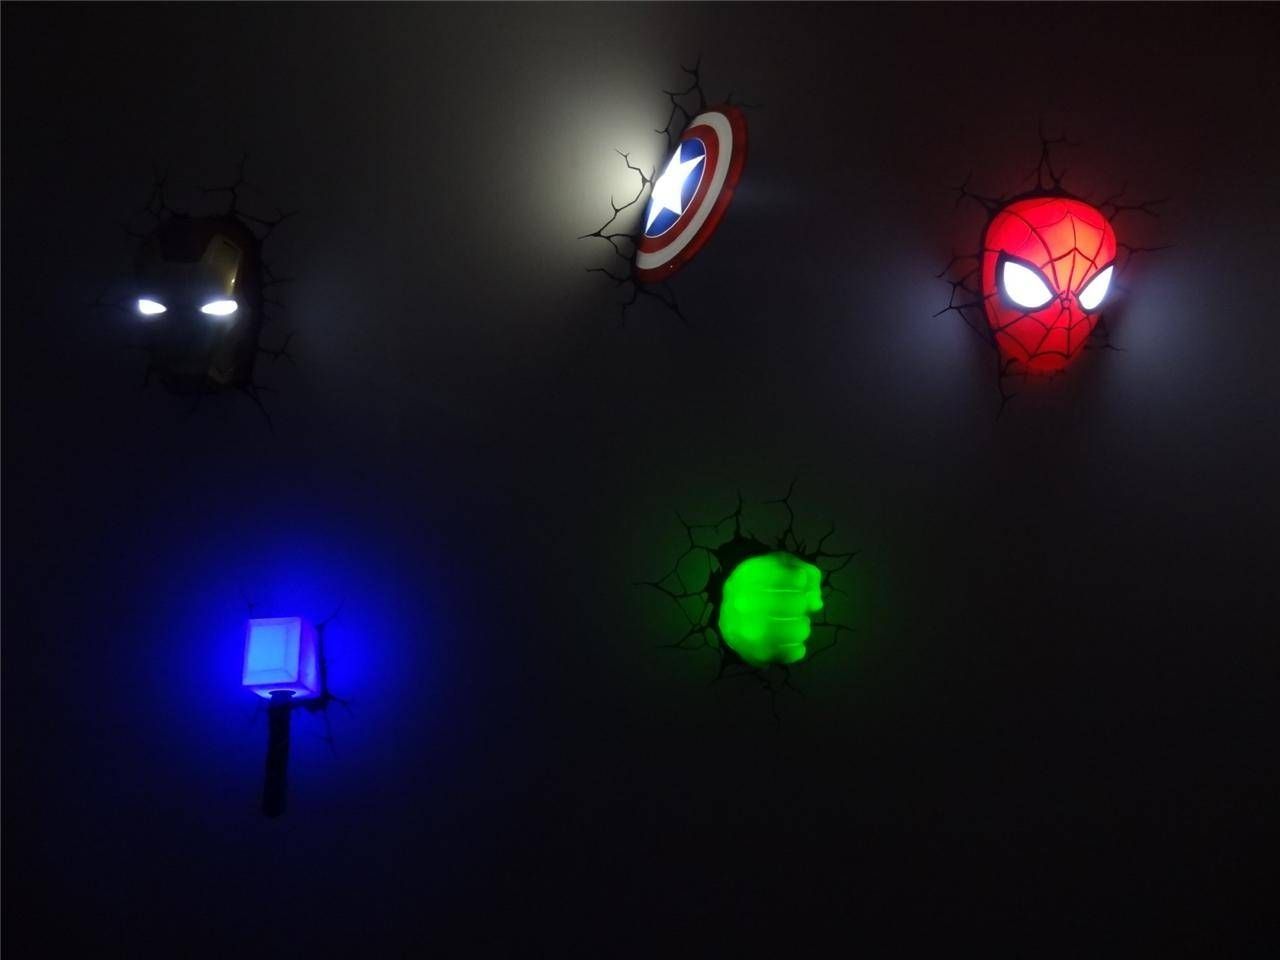 3d Wall Art Captain America Night Light | Wallartideas Within Best And Newest Captain America 3d Wall Art (View 19 of 20)